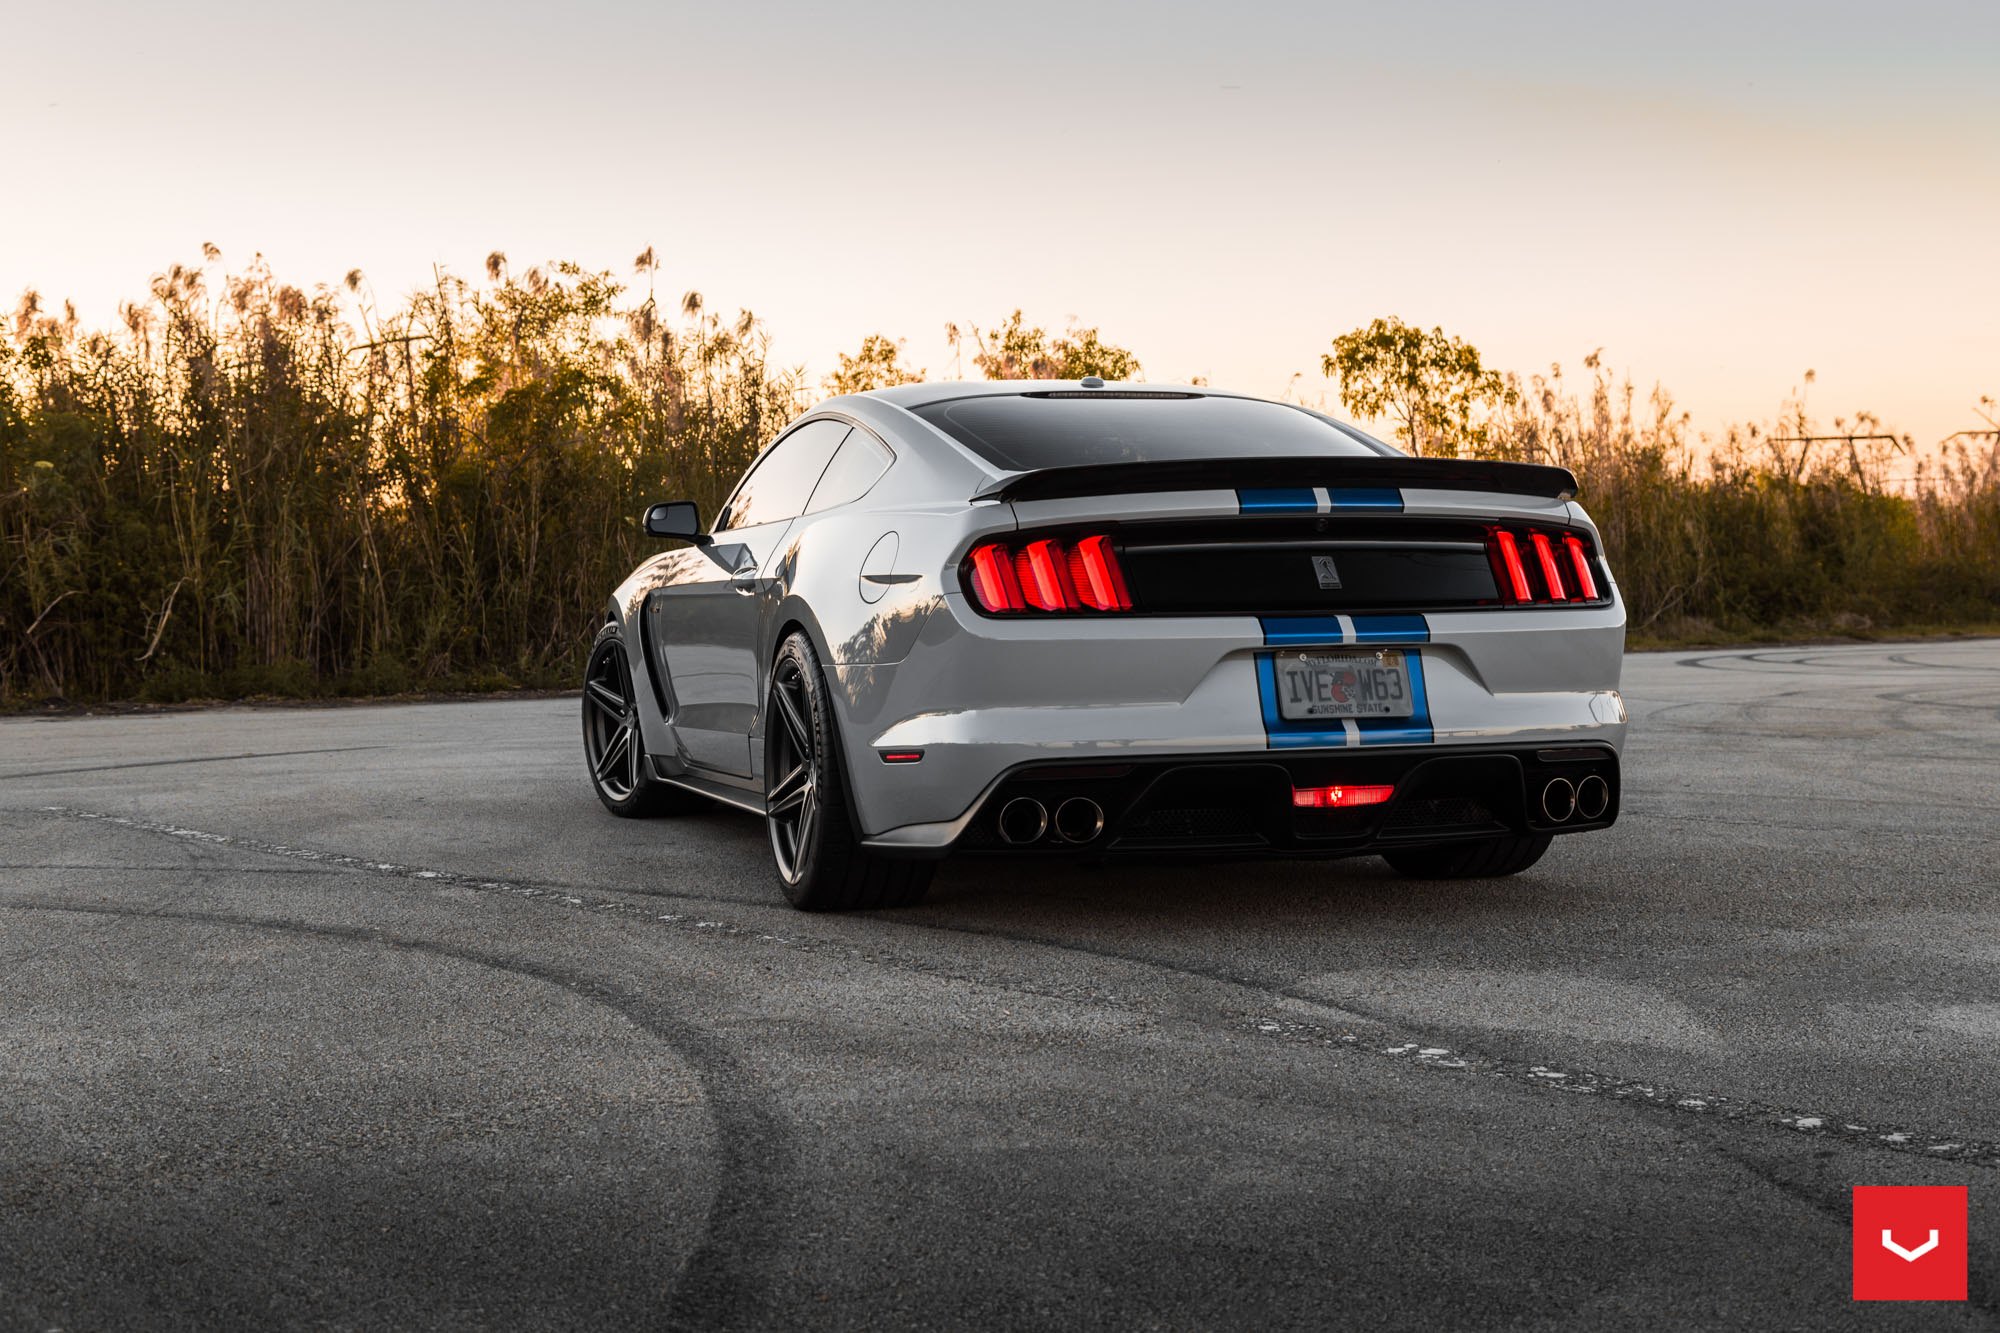 Gray Ford Mustang with Custom Rear Diffuser - Photo by Vossen.